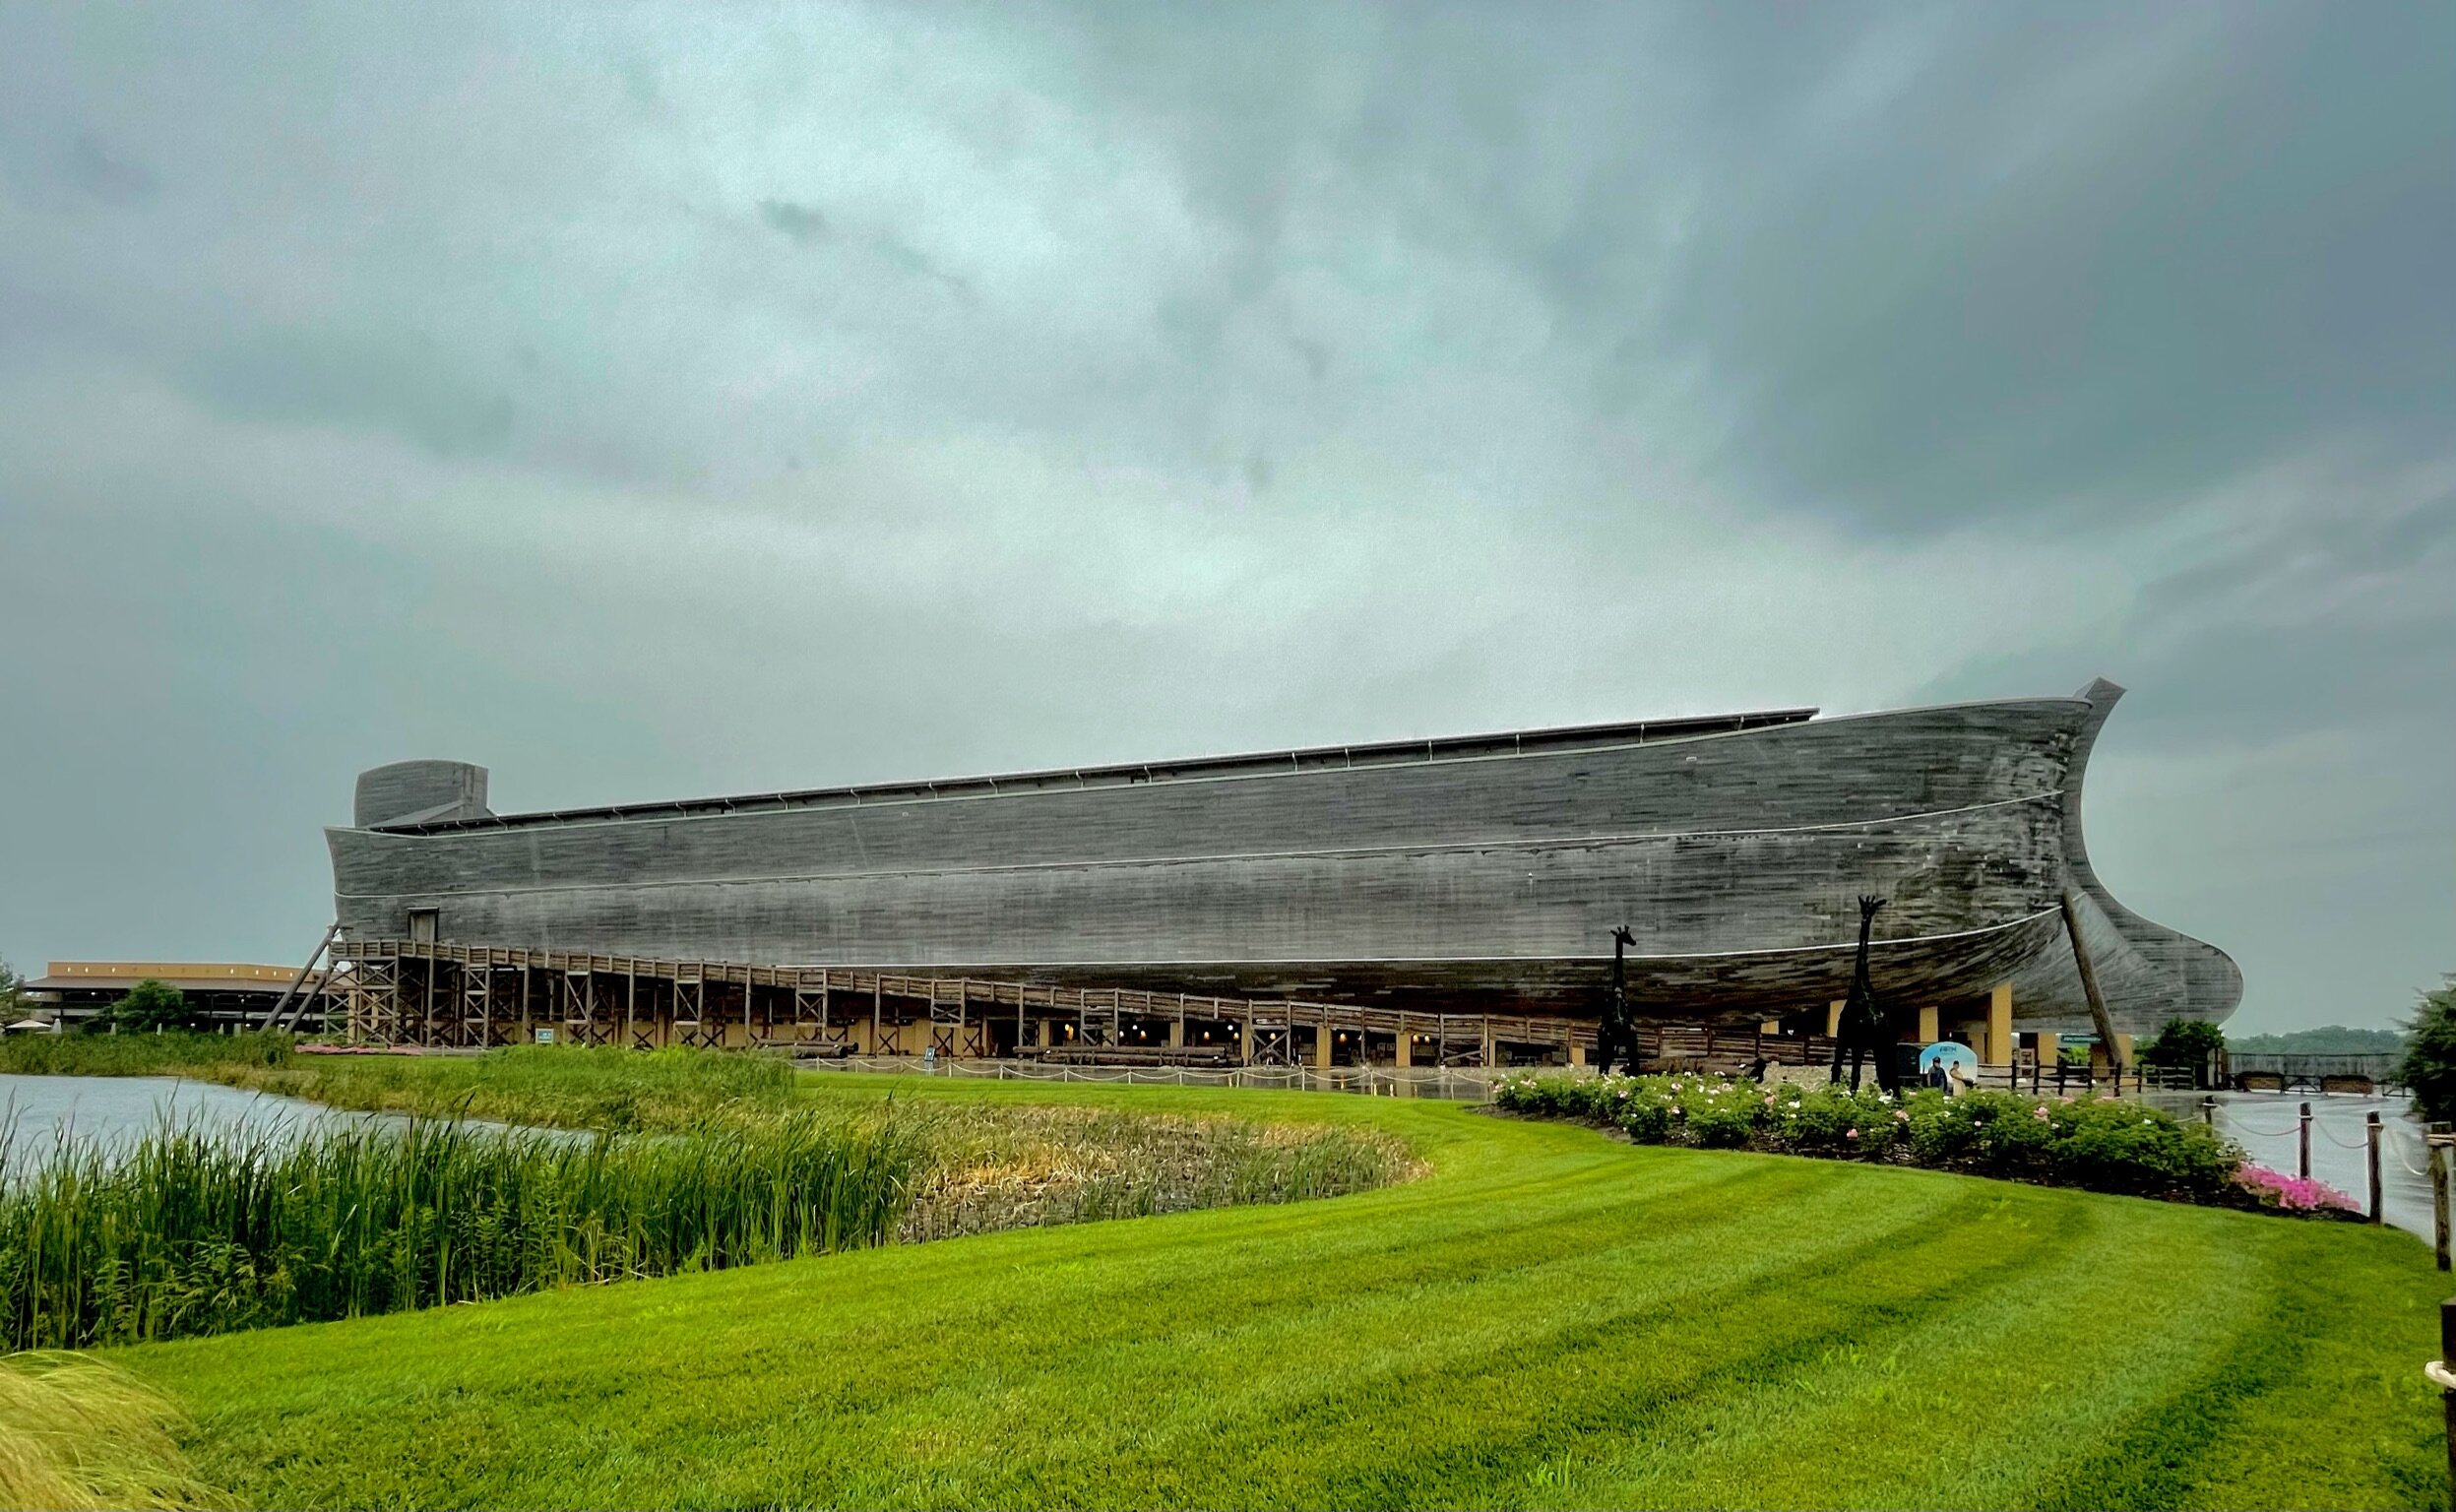  The  Ark Encounter  in Williamstown, Kentucky, was quite a sight! This ark is described as a modern engineering marvel at 510 feet long, 85 feet wide, and 51 feet high. The ark was built as literally as the Bible specifies, with artistic liberties t